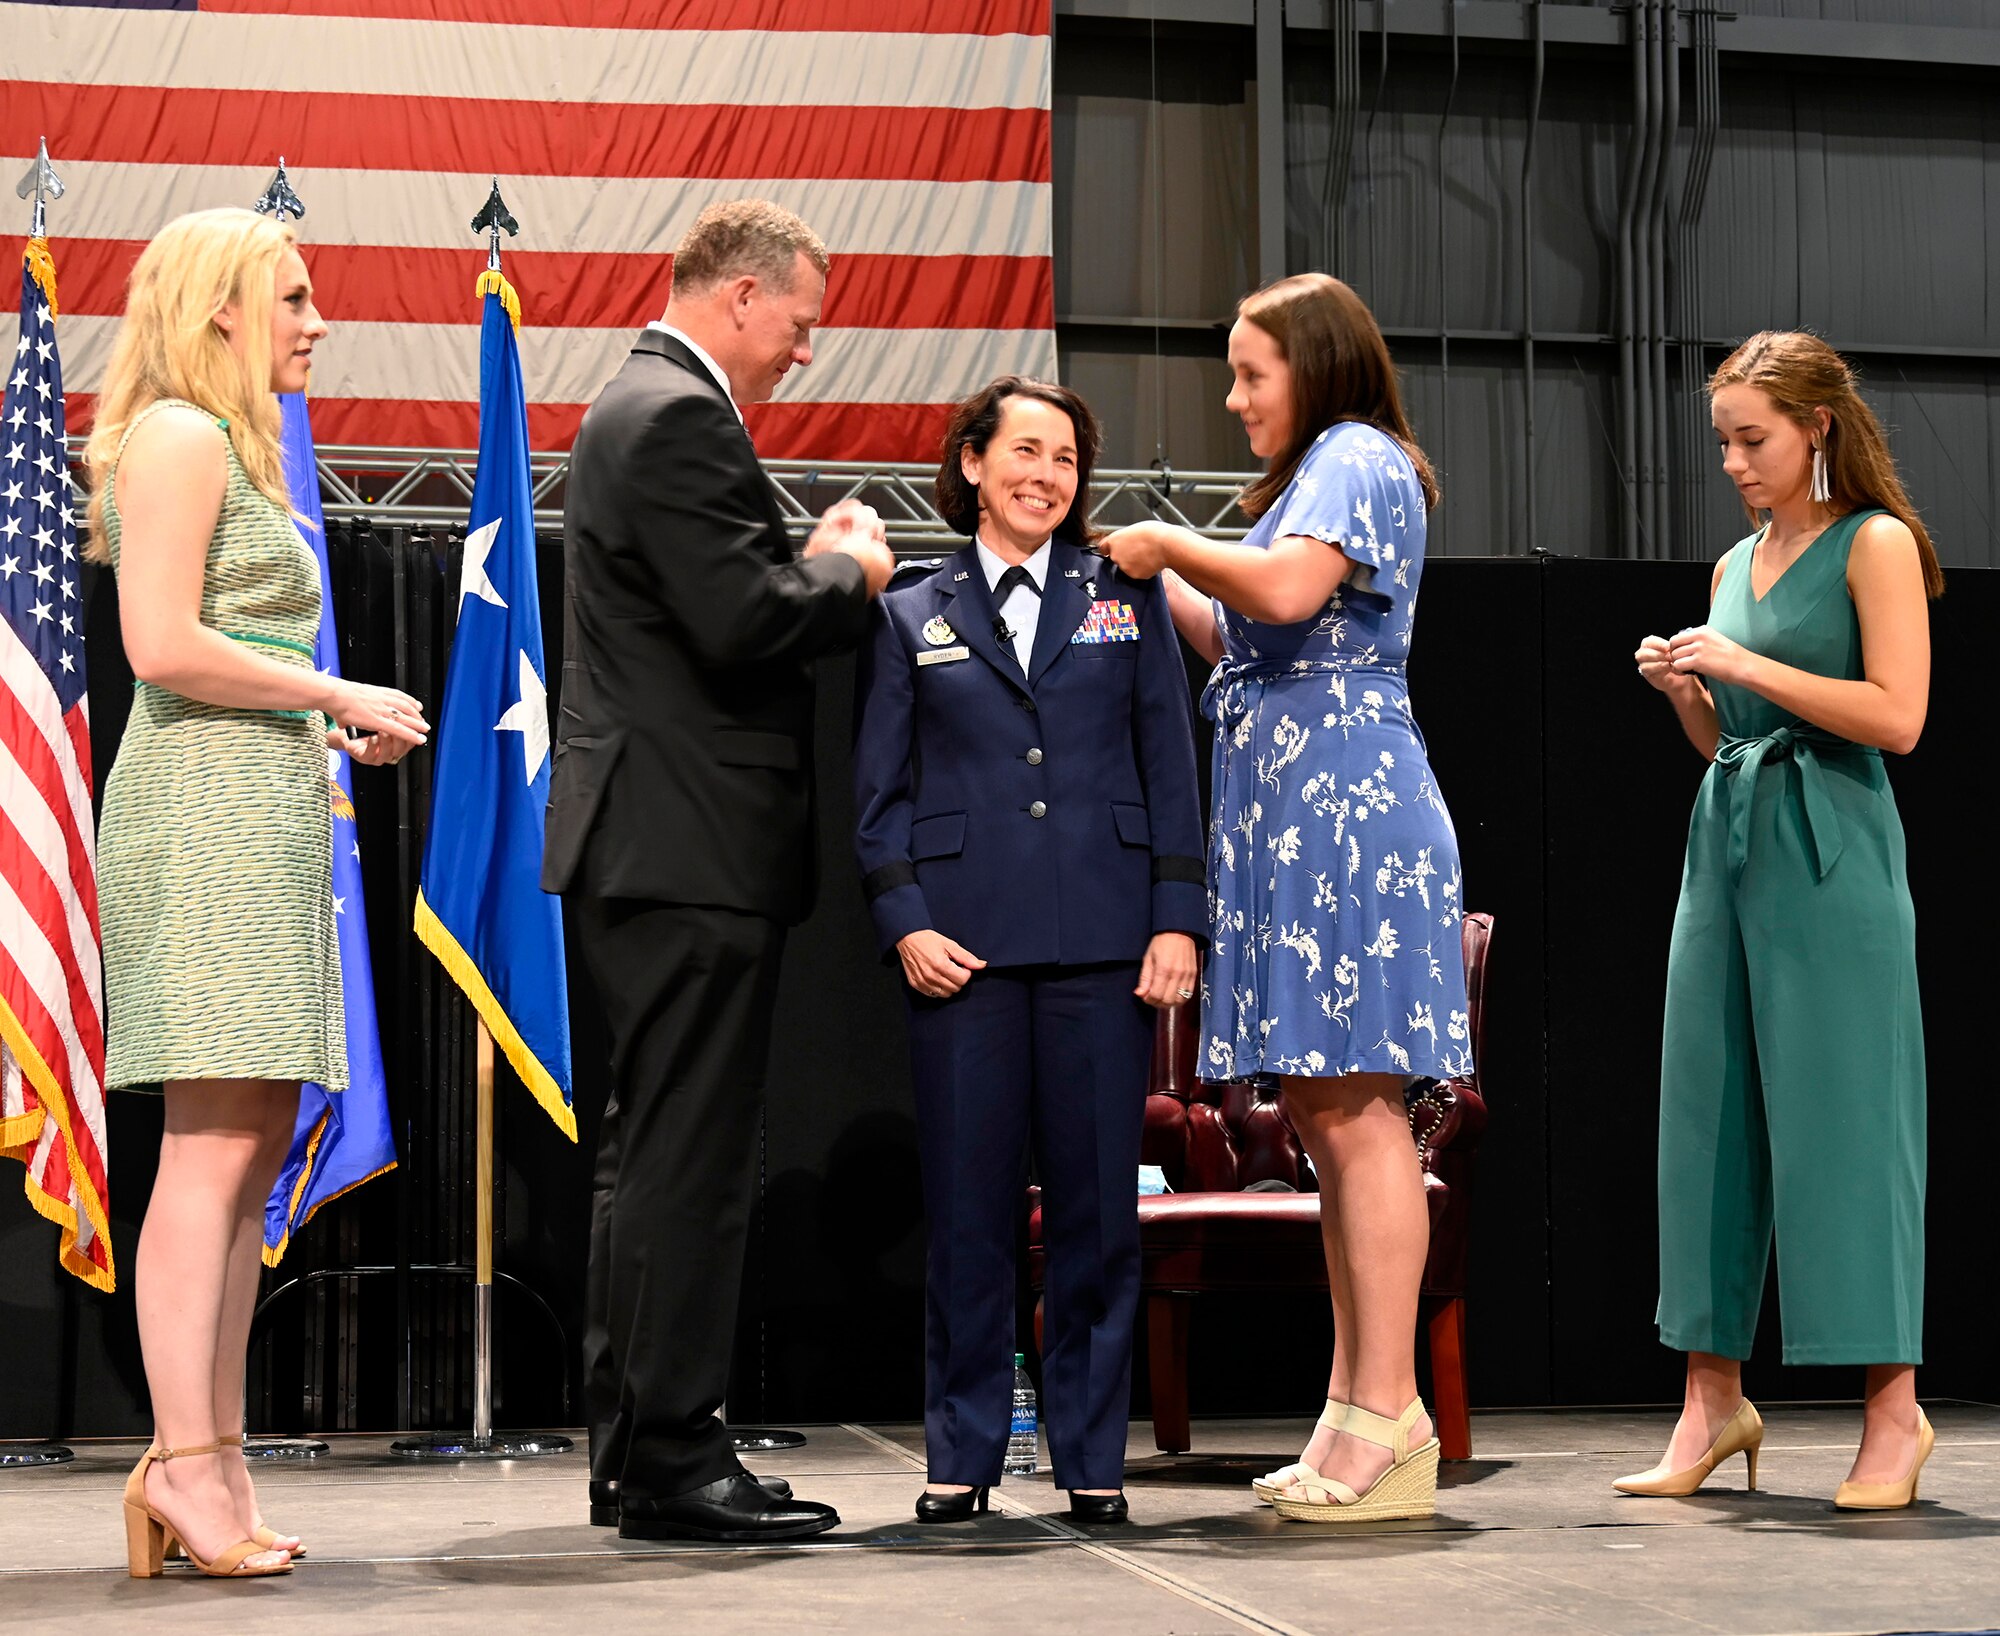 Col. Jeannine Ryder smiles as her family pins the rank of brigadier general on her uniform Aug. 3 at the National Museum of the United States Air Force, Wright-Patterson Air Force Base, Ohio. (photo by Darrius Parker)